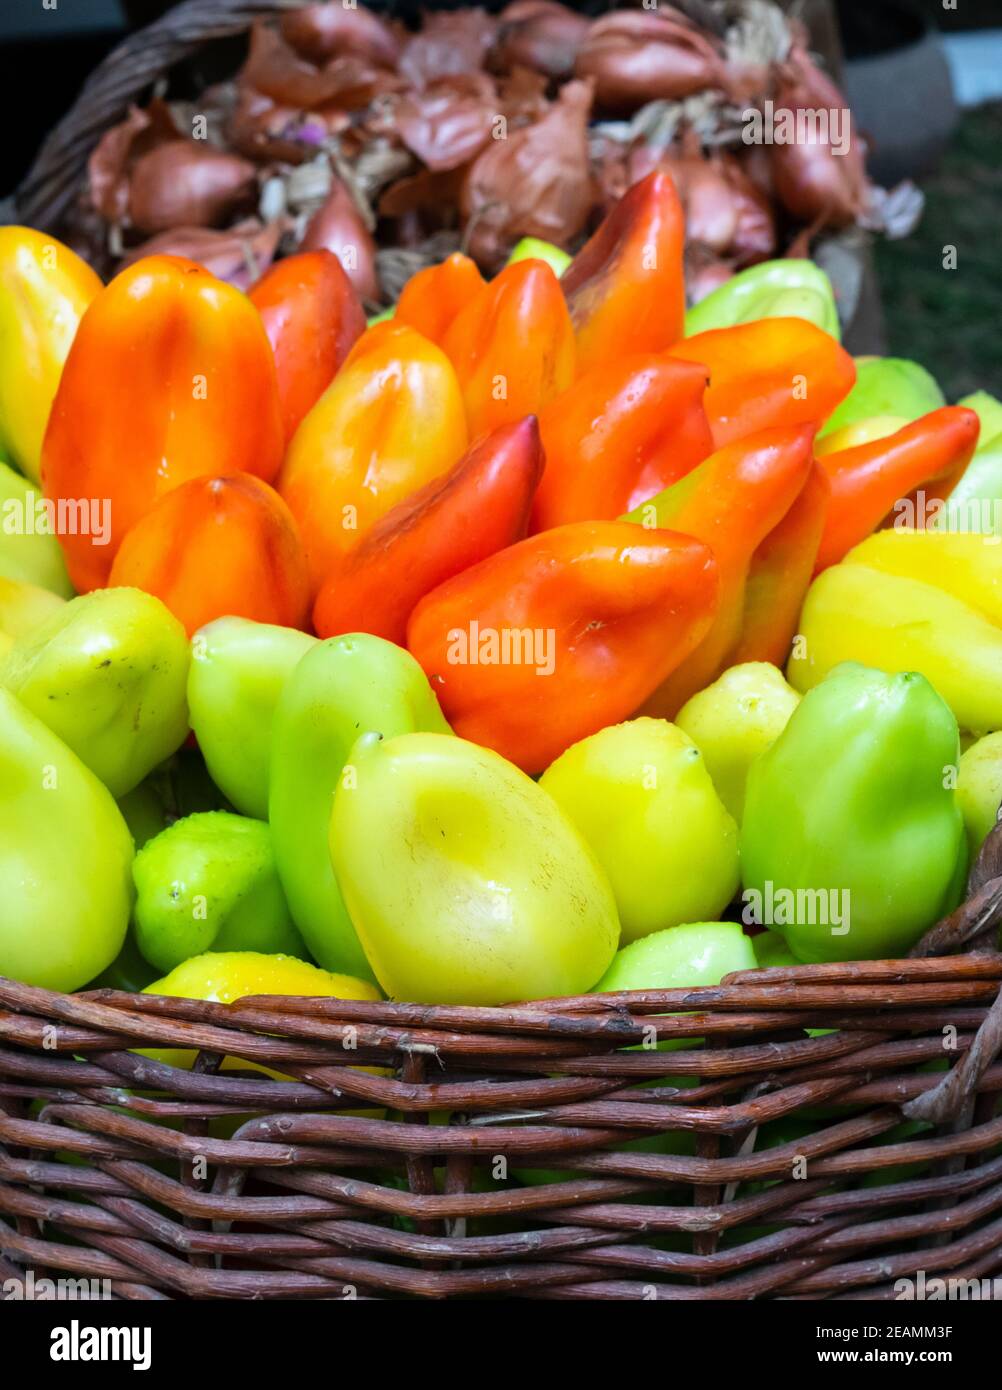 Bulgarian pepper is green and red in the basket Stock Photo